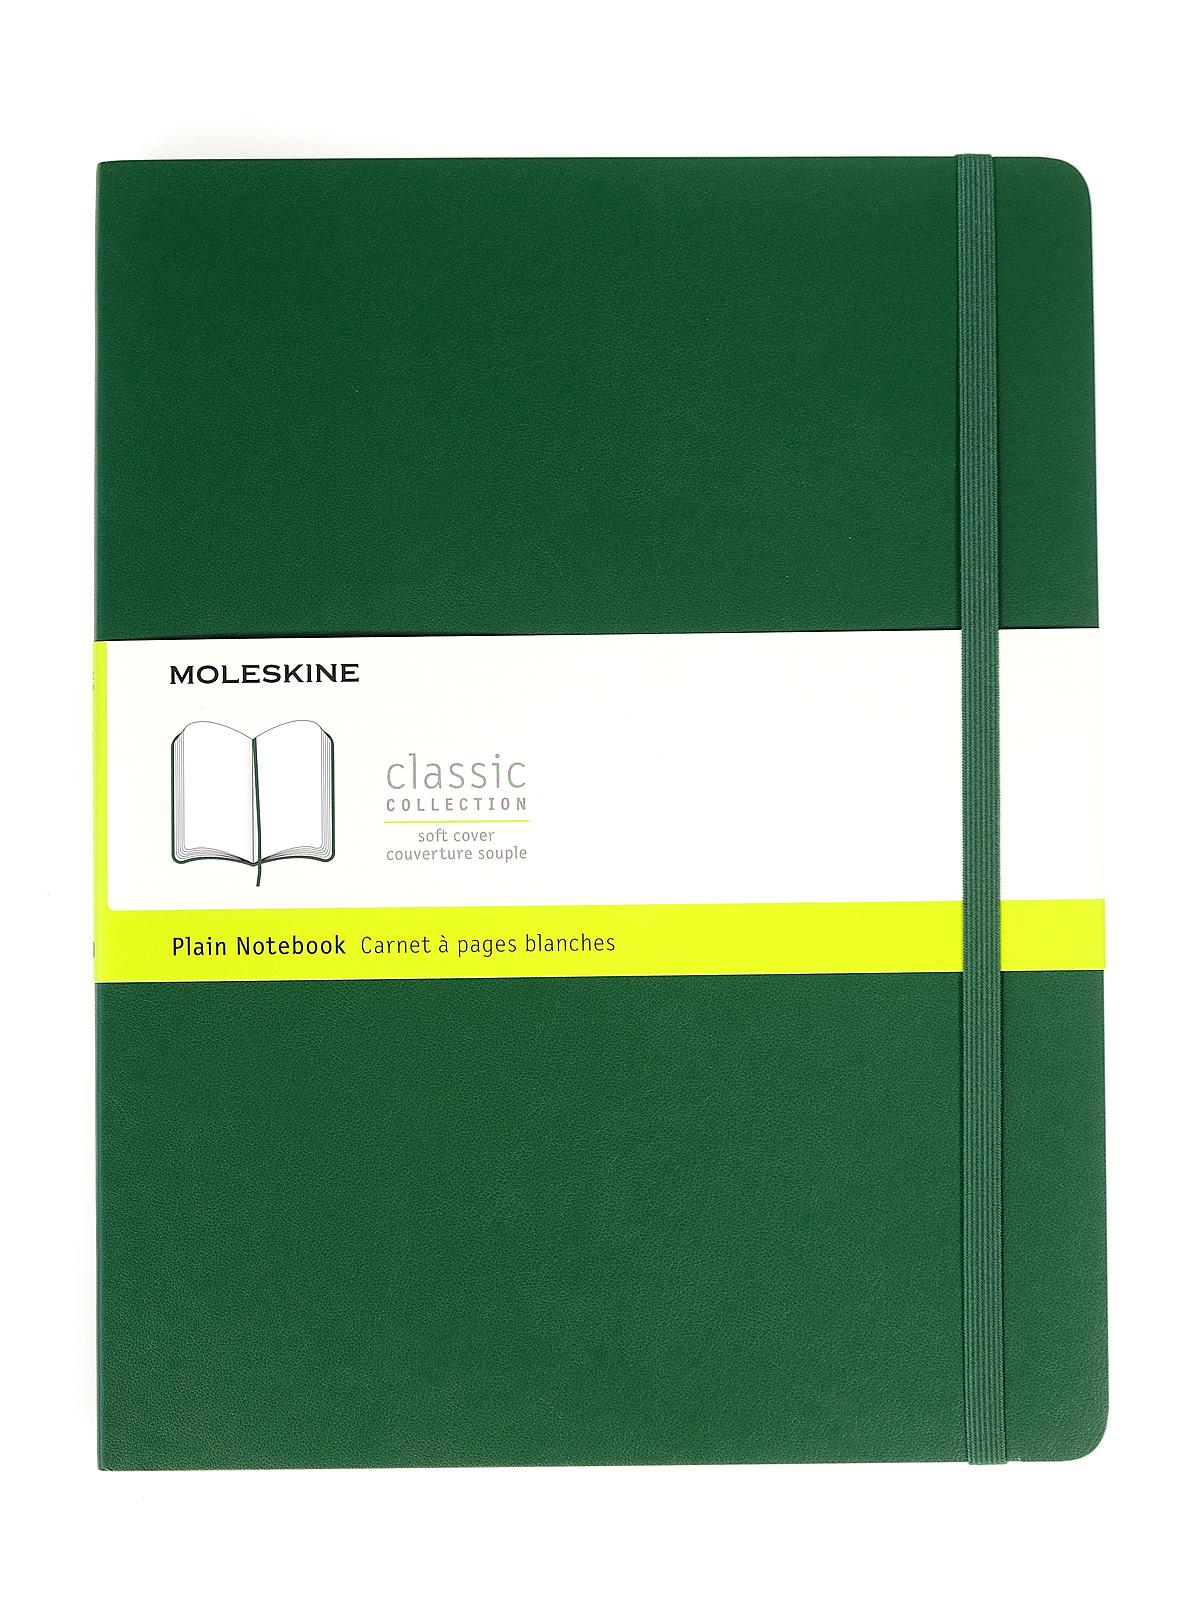 Classic Soft Cover Notebooks Myrtle Green 7 1 2 In. X 9 3 4 In. 192 Pages, Unlined